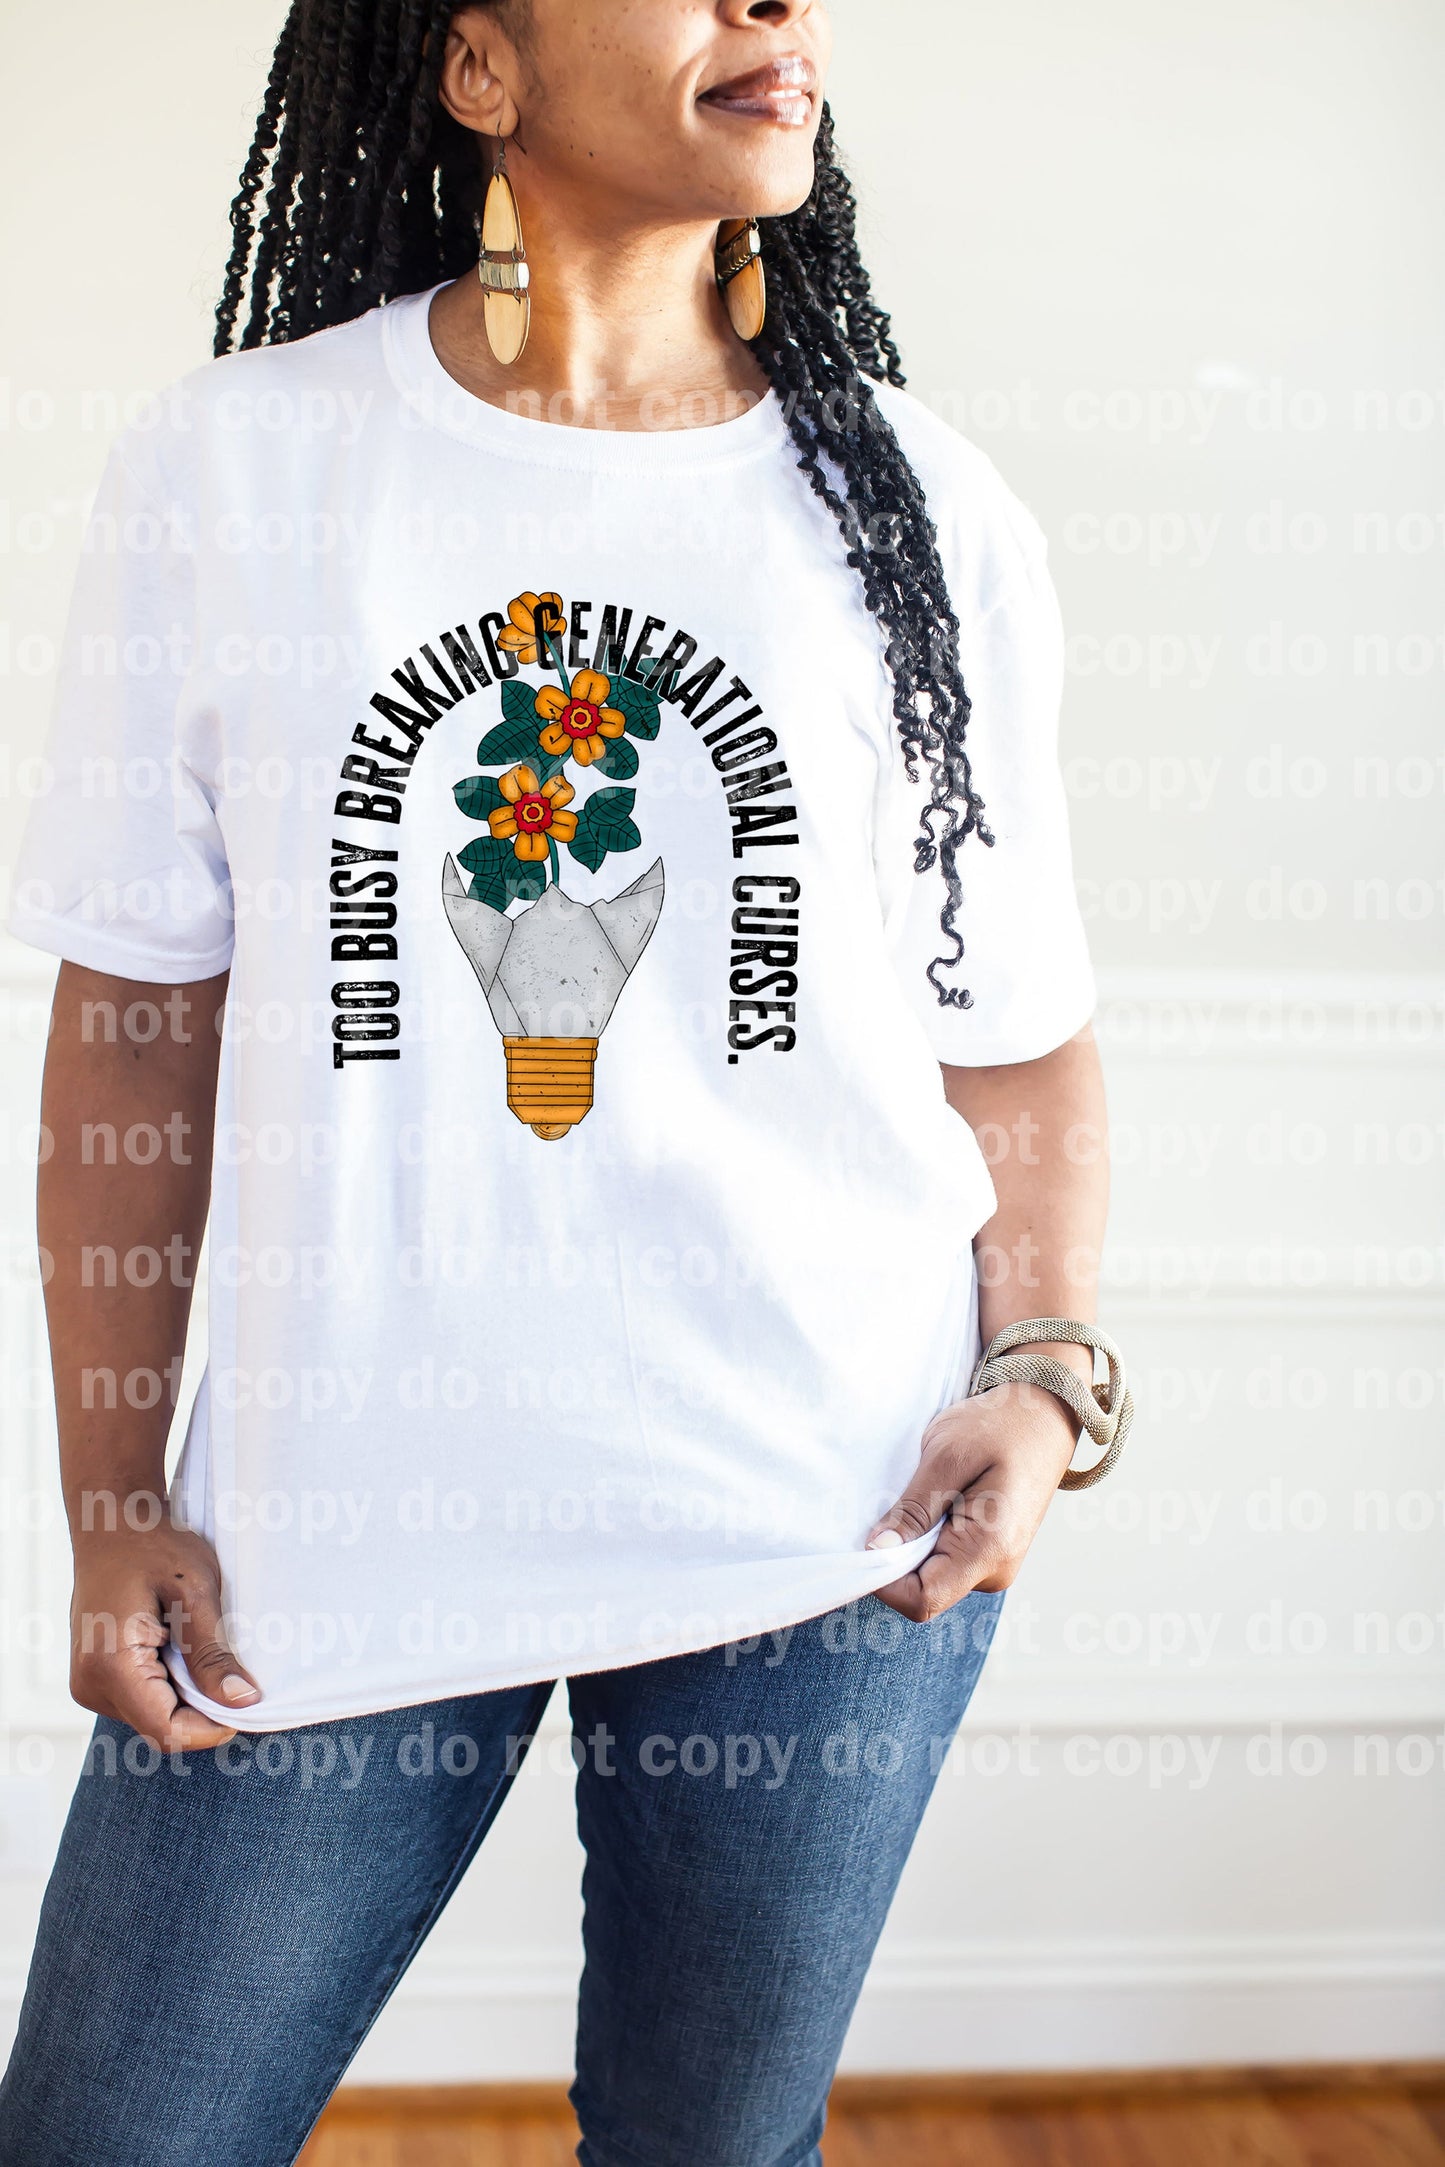 Too Busy Breaking Generational Curses Dream Print or Sublimation Print